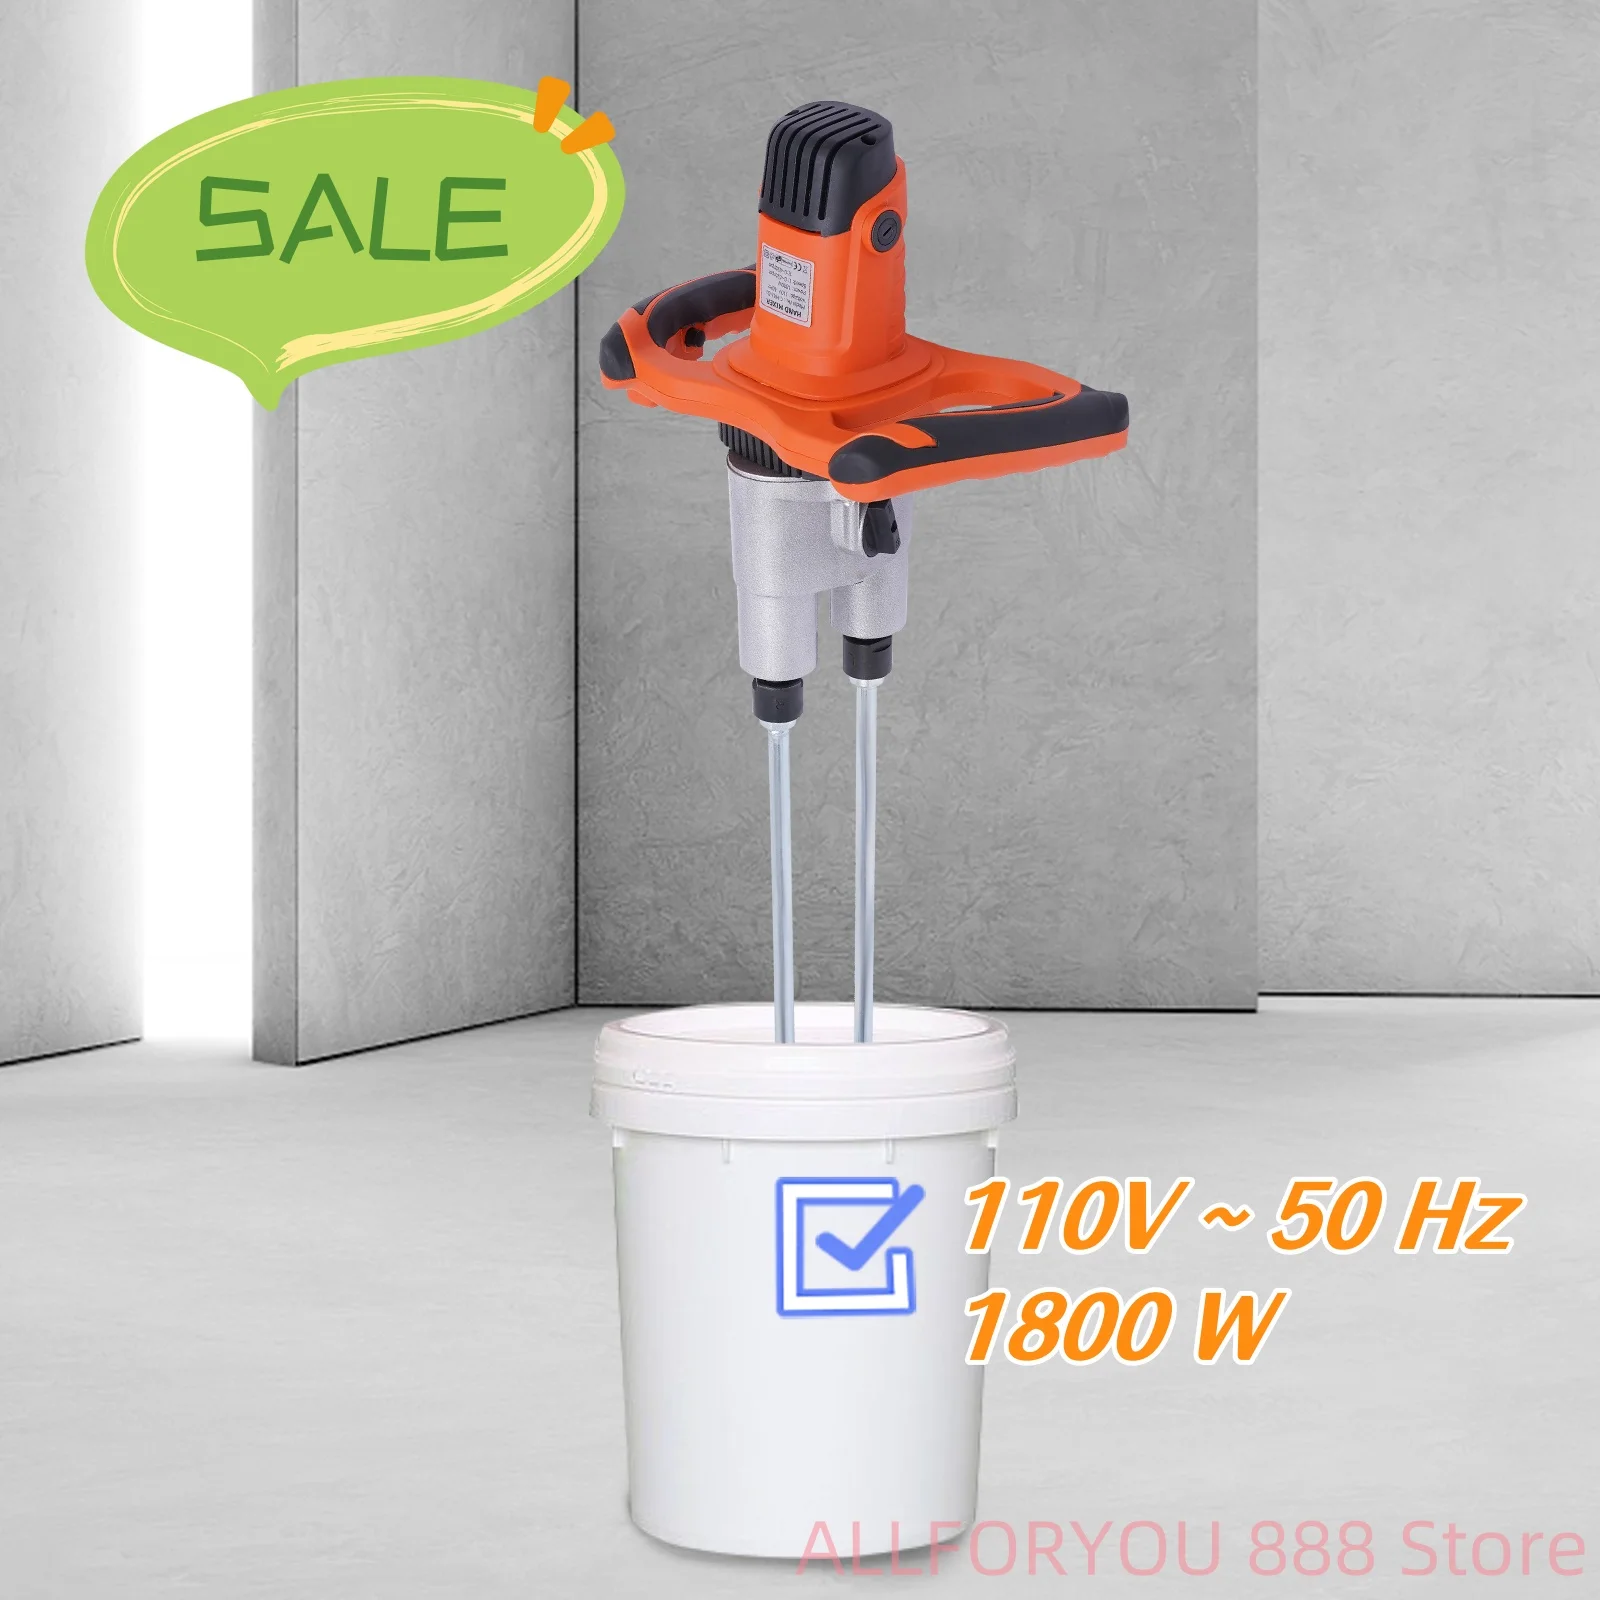 1800W Double Paddle Electric Mortar Mixer 2 Speed with Robust Aluminum Die-cast Housing Powerful and Handy double bamboo intelligent light and handy projector hanger with 0 6 3m running distance manual remote rs control